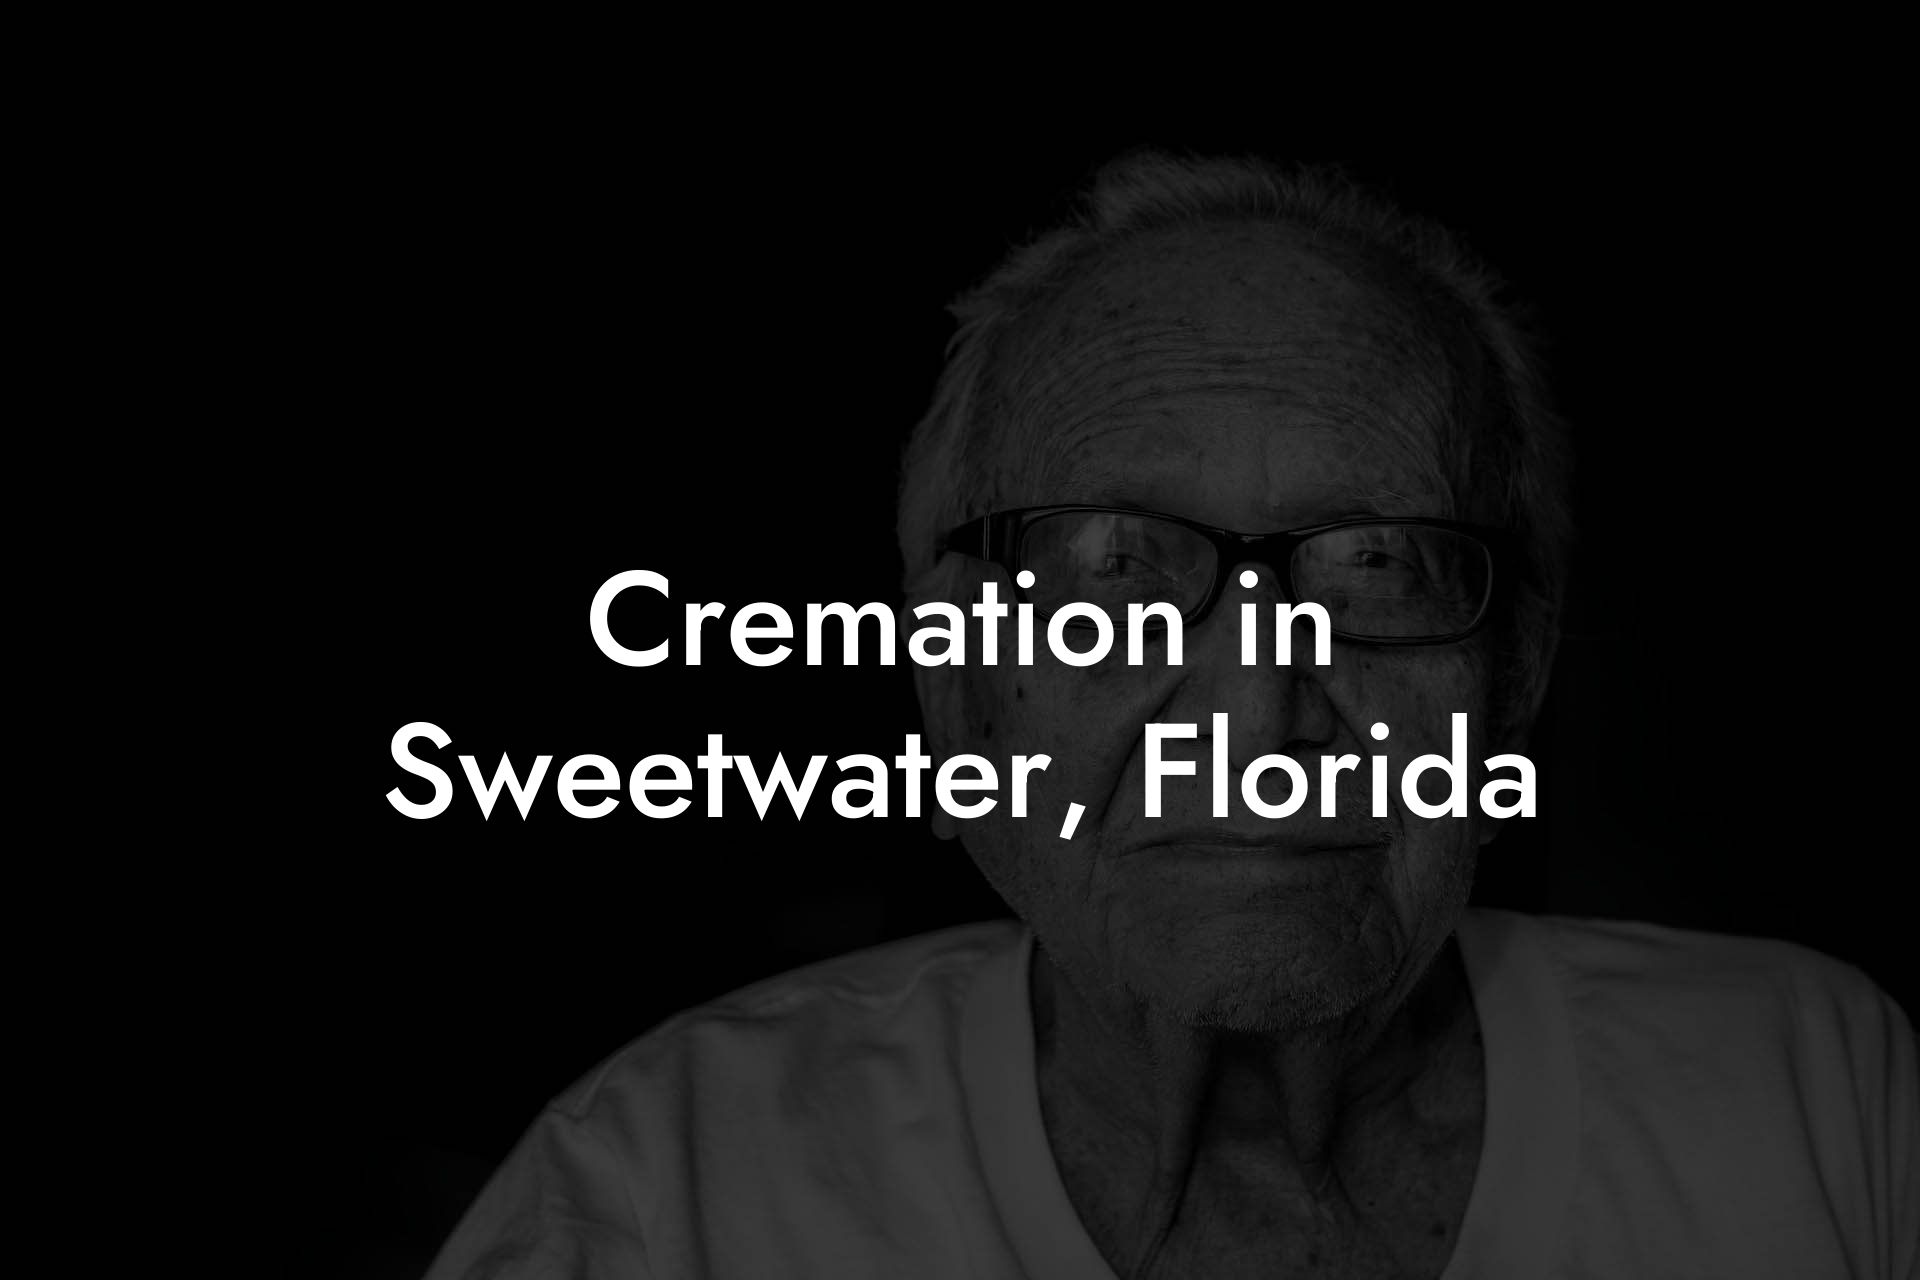 Cremation in Sweetwater, Florida